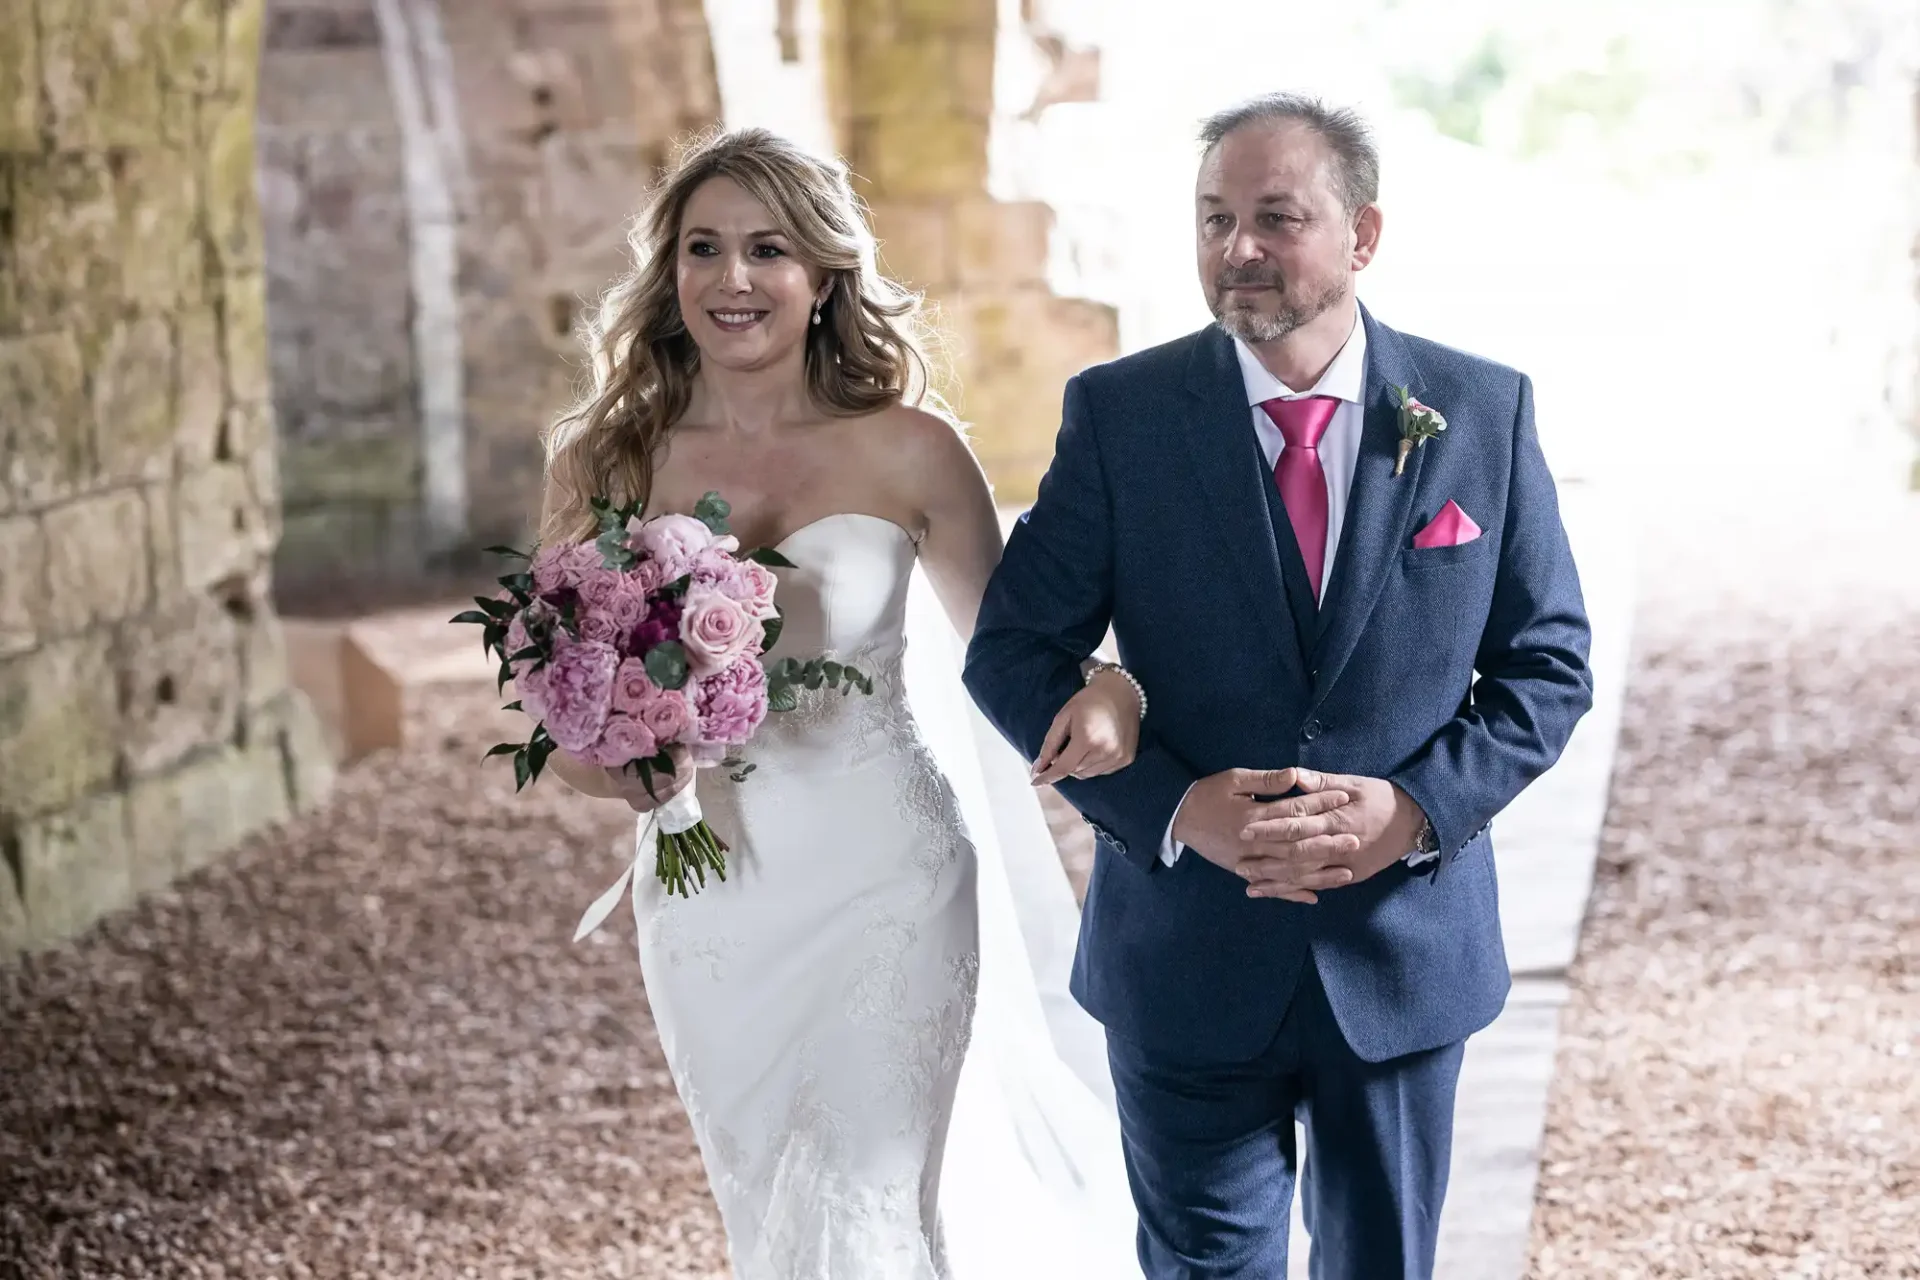 A bride in a white gown walks arm in arm with an older man in a suit, both smiling, under a stone archway, the bride holding a bouquet of pink flowers.